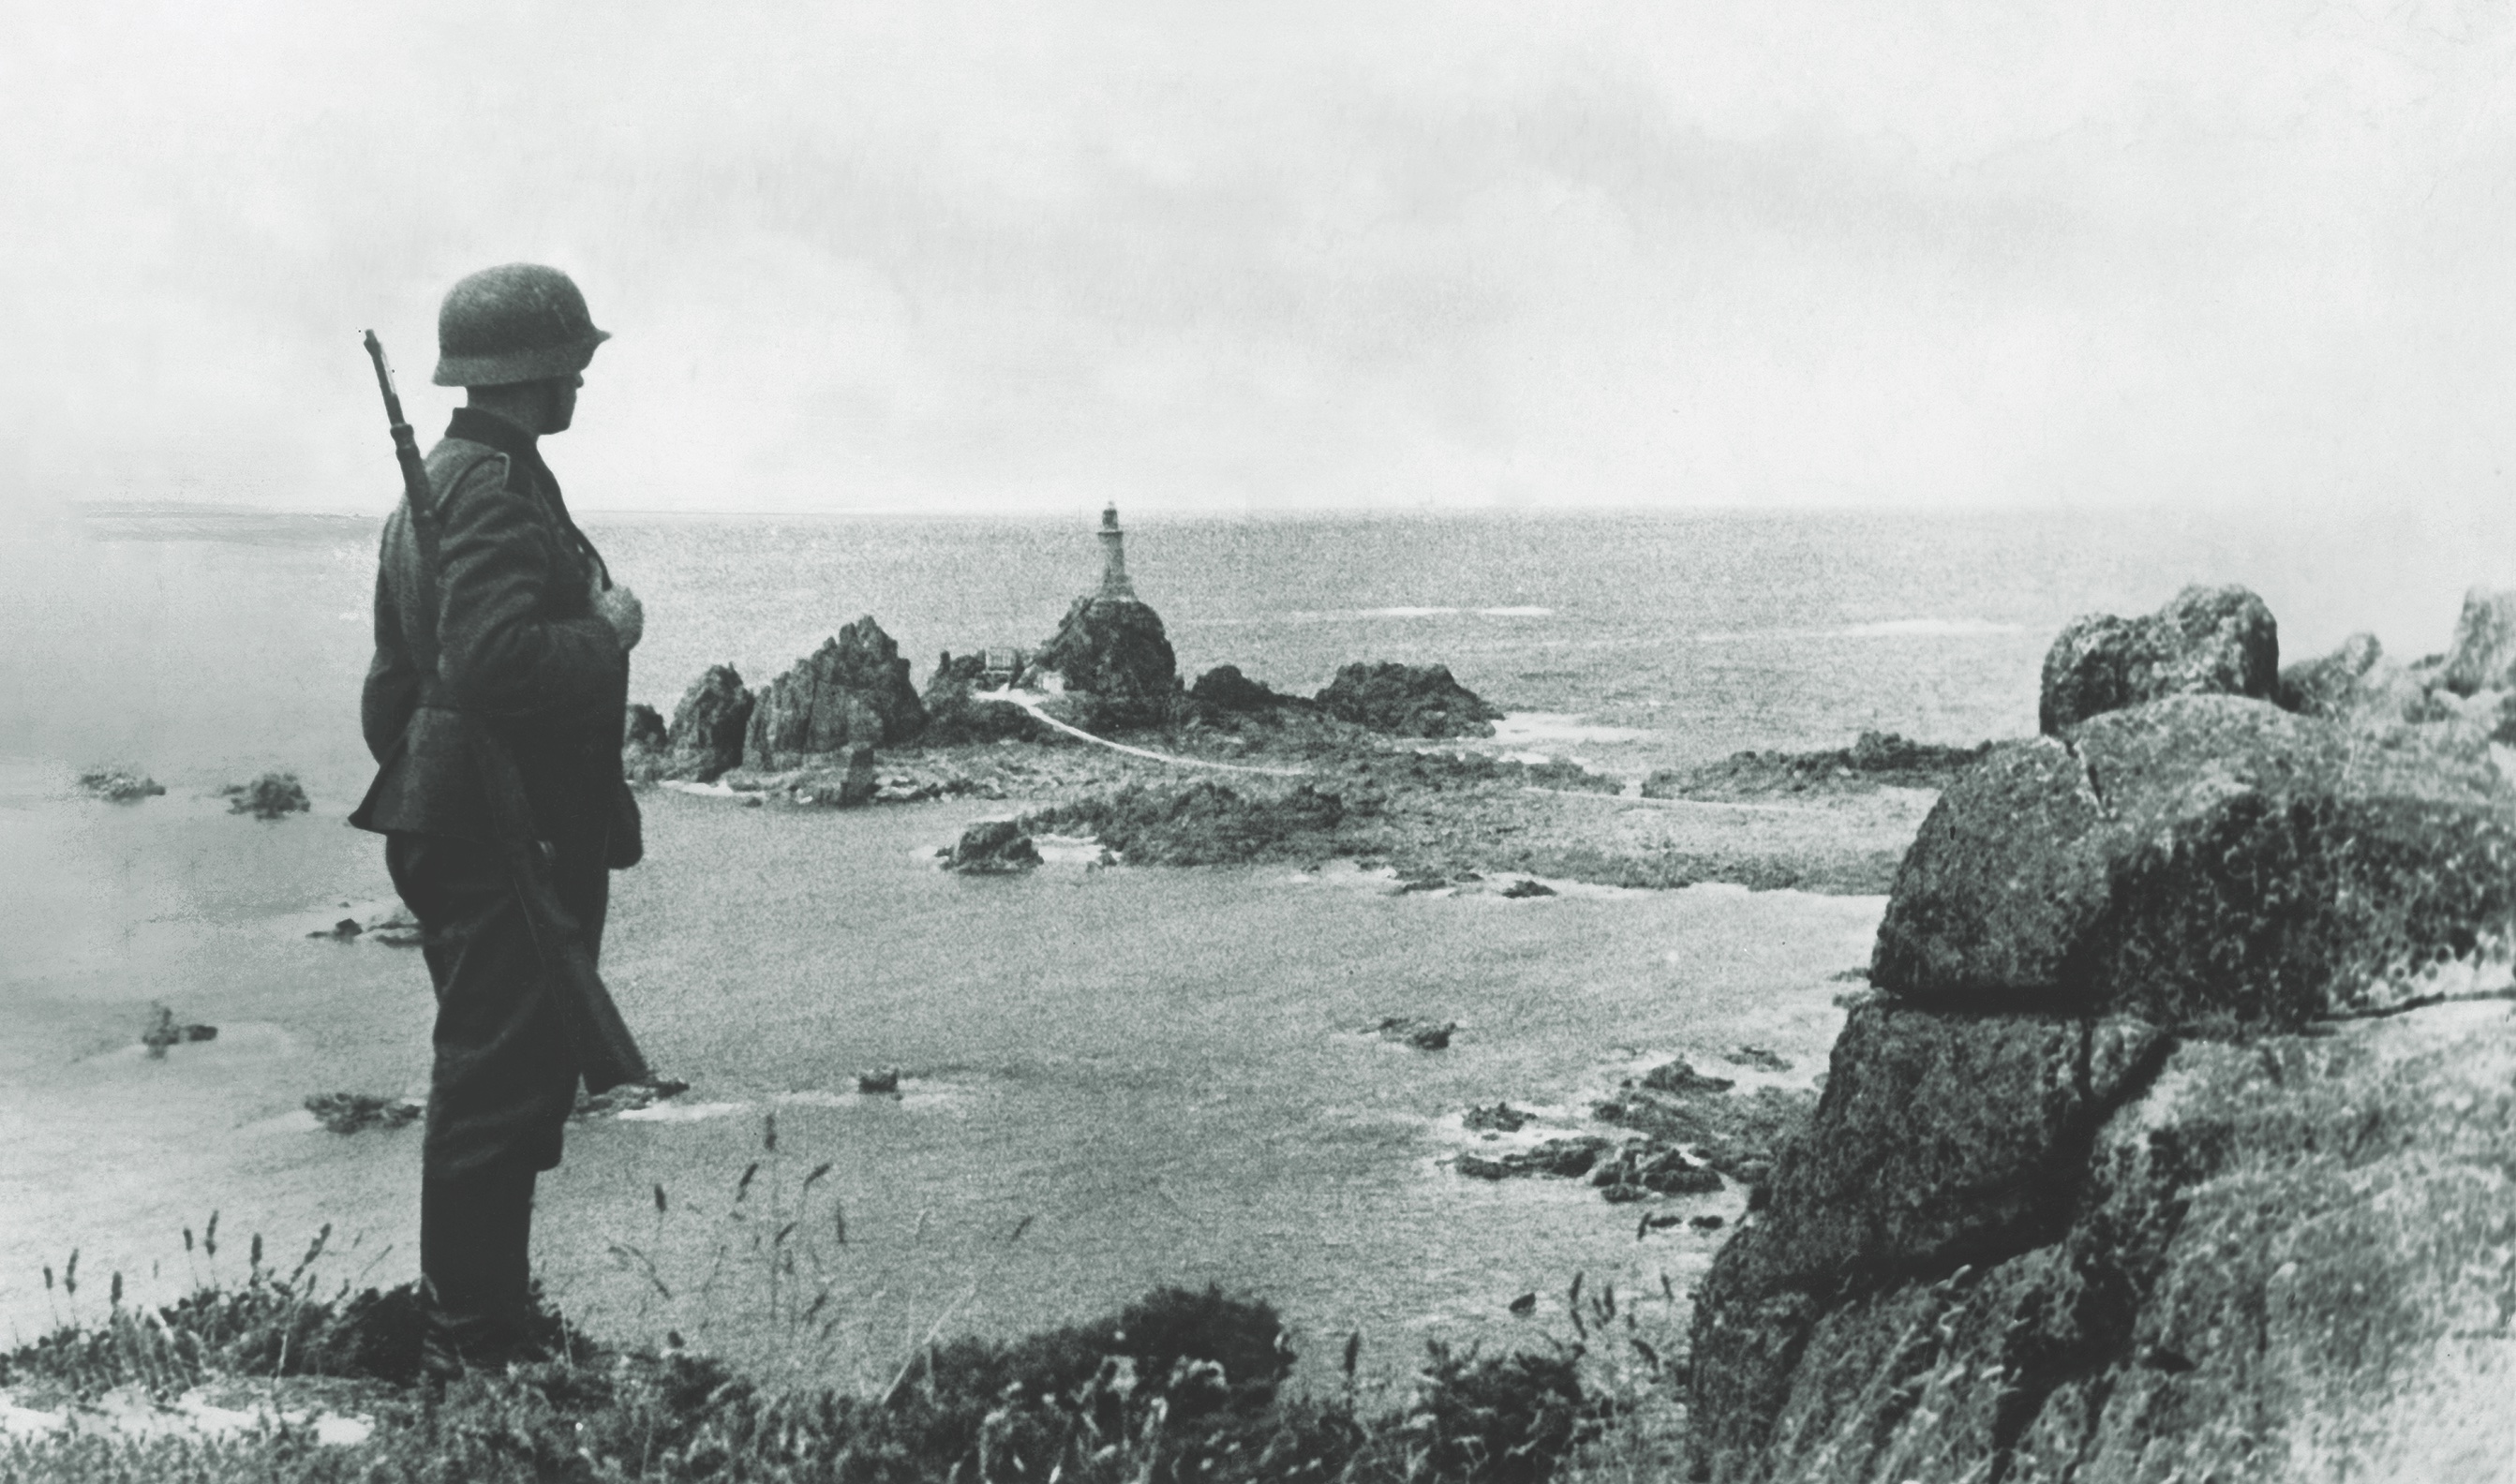 A Nazi propaganda photo depicts a Wehrmacht soldier standing watch on La Corbière (“a place where crows gather”), off the coast of Jersey, in 1944. (Ullstein Bild DTL/Getty Images) 